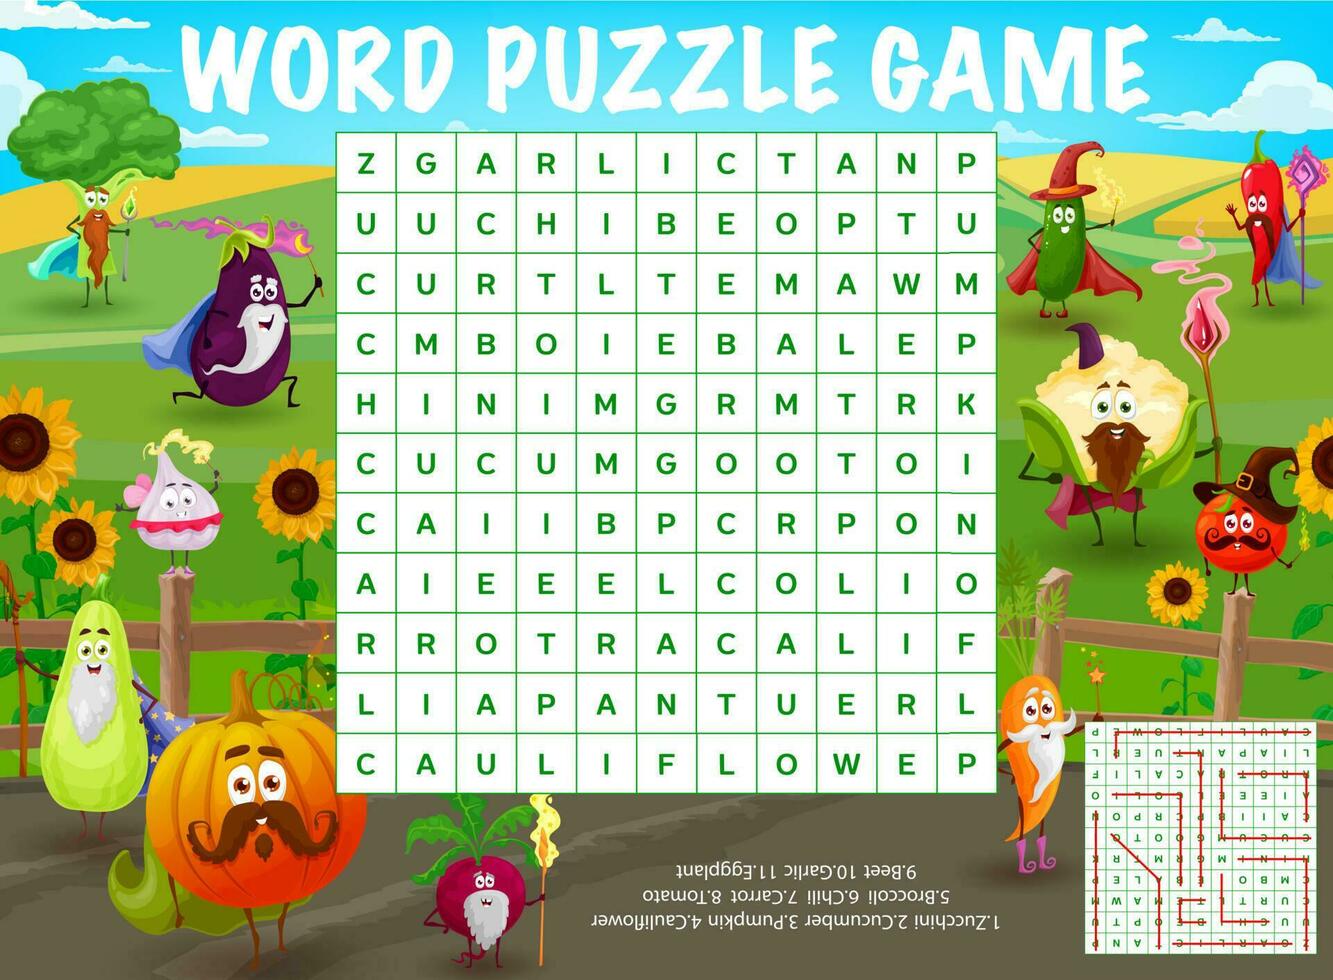 Vegetable wizards on farm field word search puzzle vector